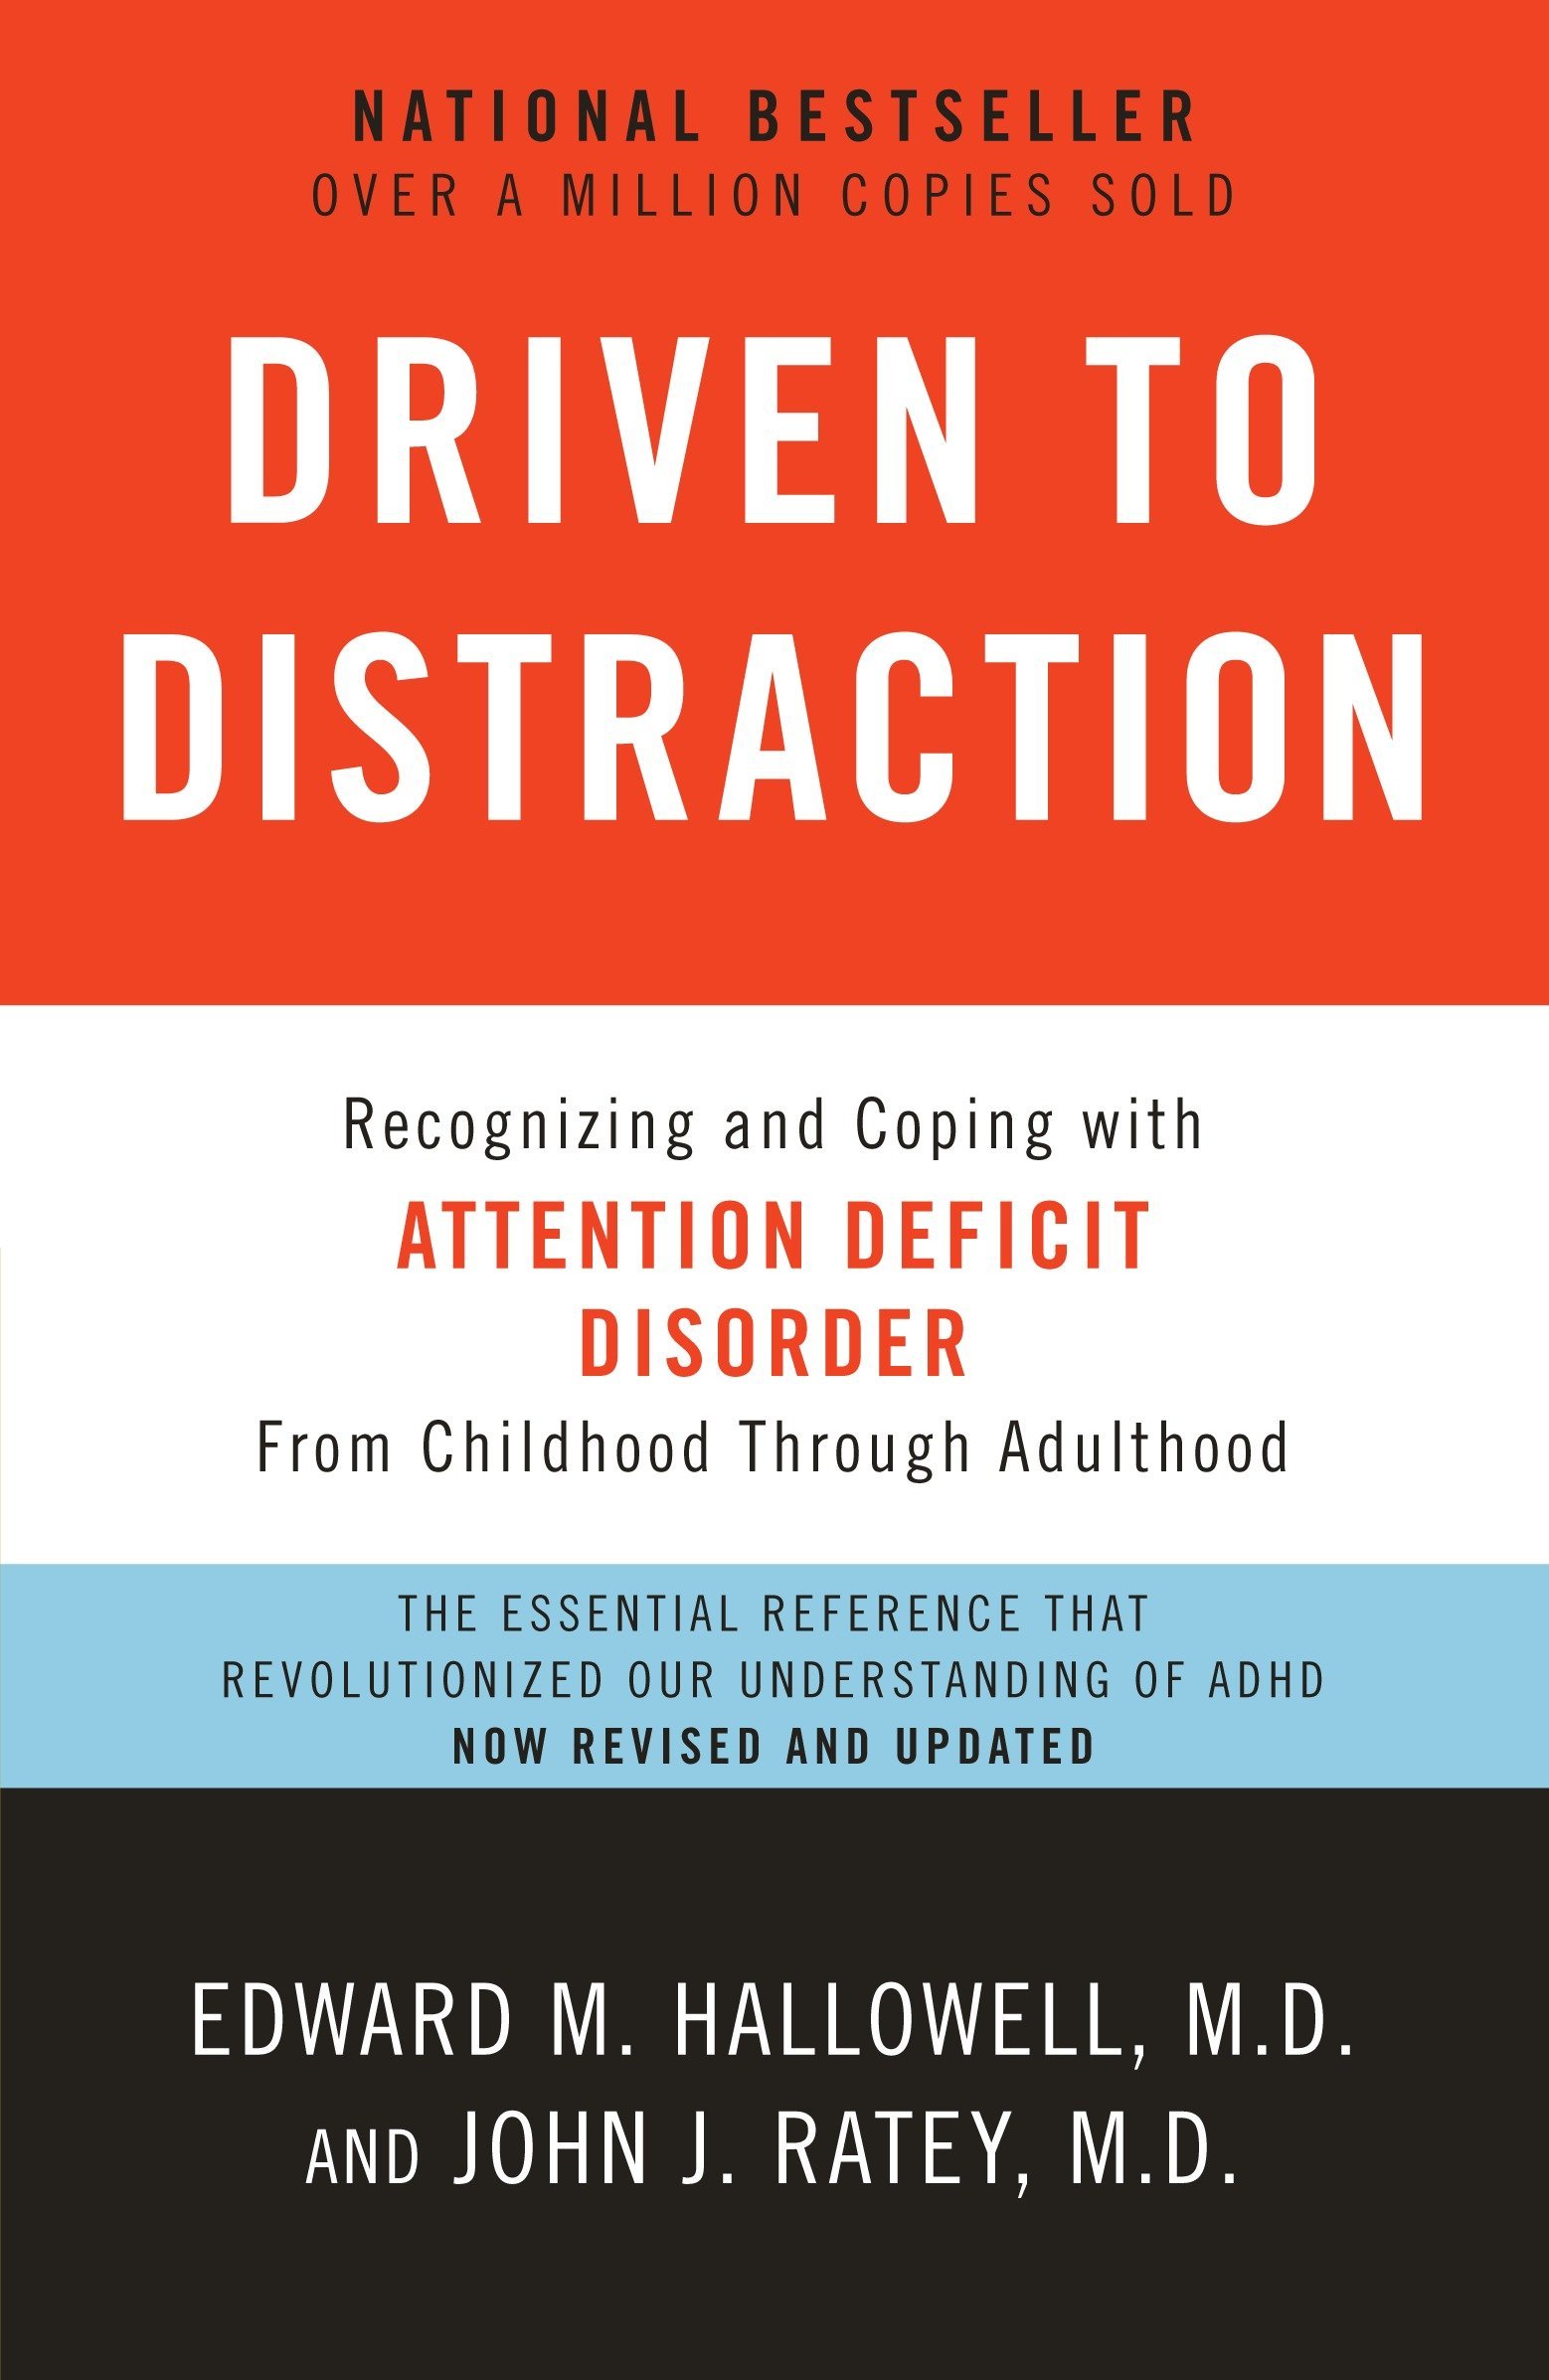 Cover of "Driven to Distraction: Recognizing and Coping with Attention Deficit Disorder